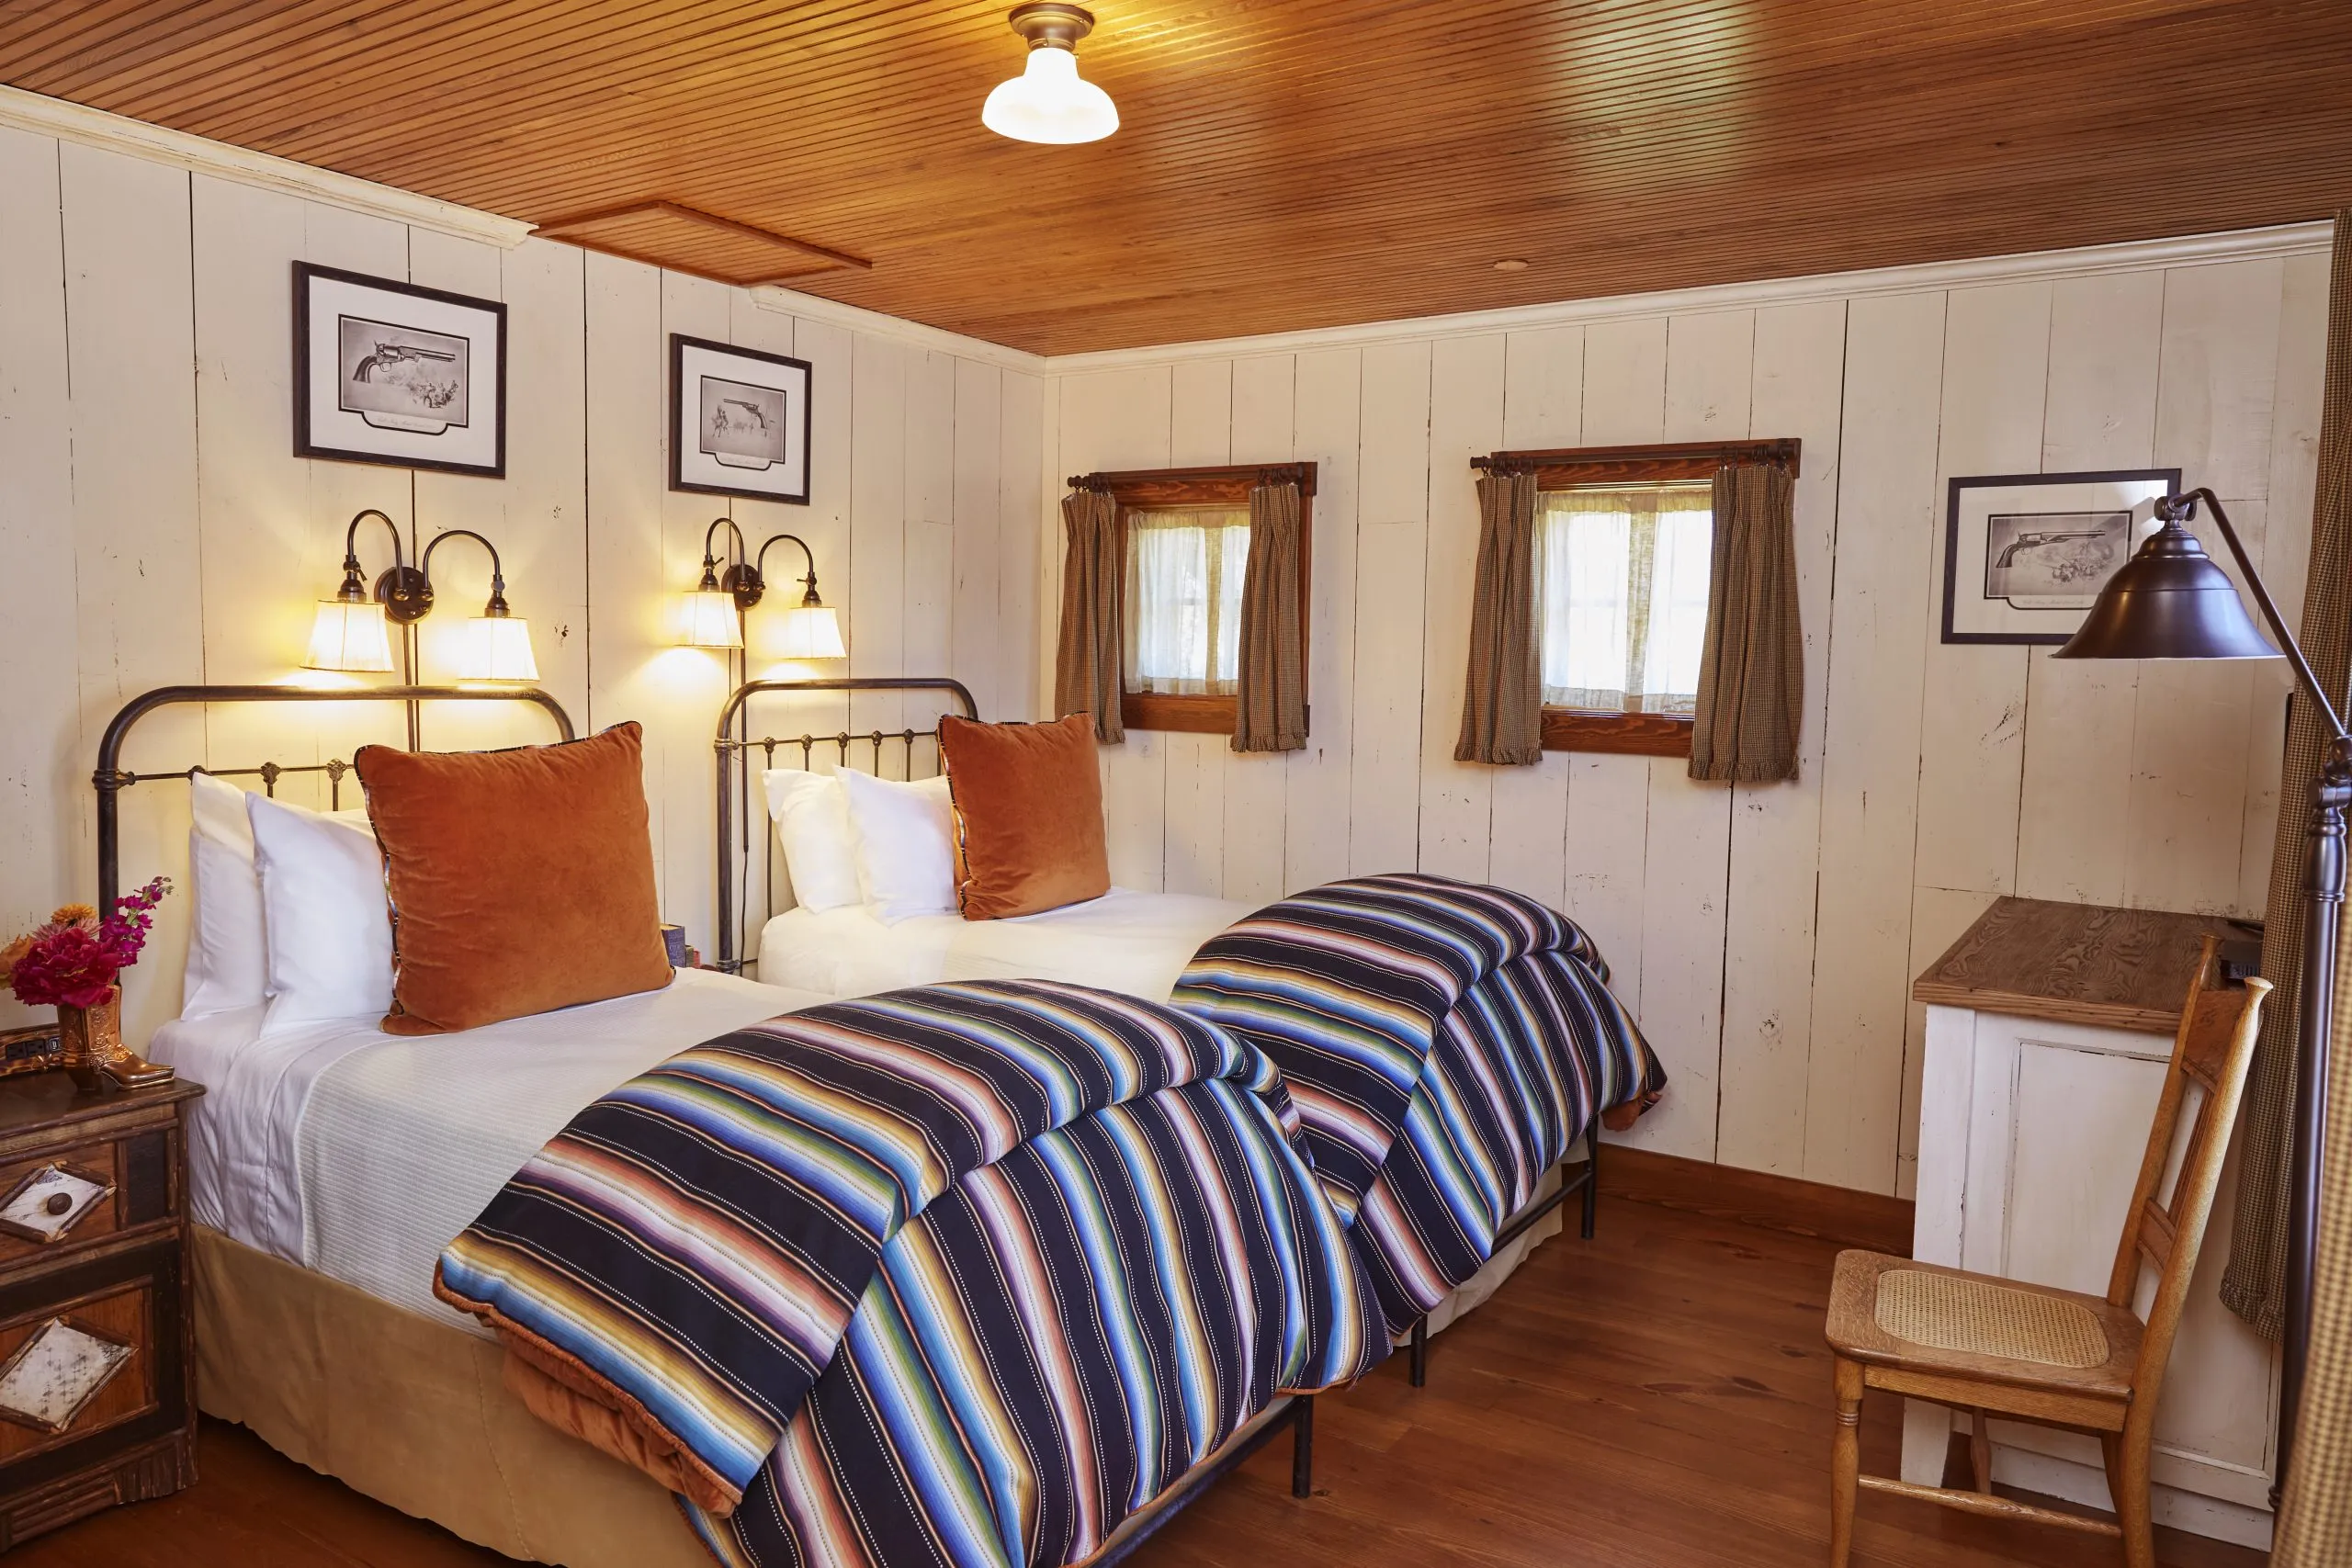 Cabin bedroom with two single beds